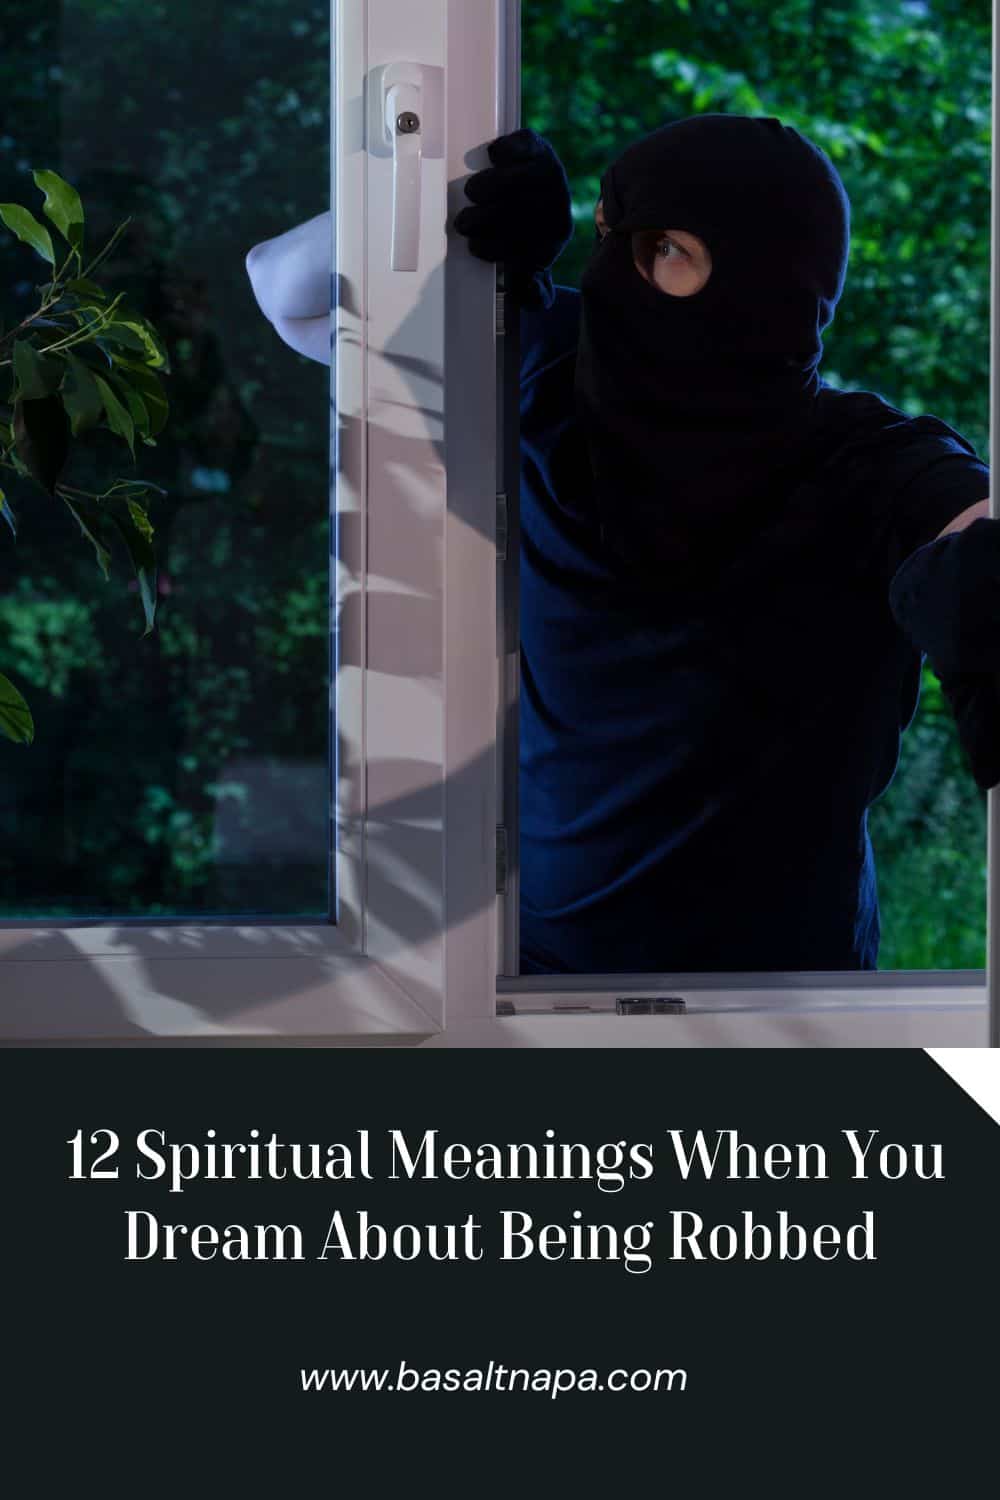 12 Spiritual Meanings of Your Dream About Being Robbed